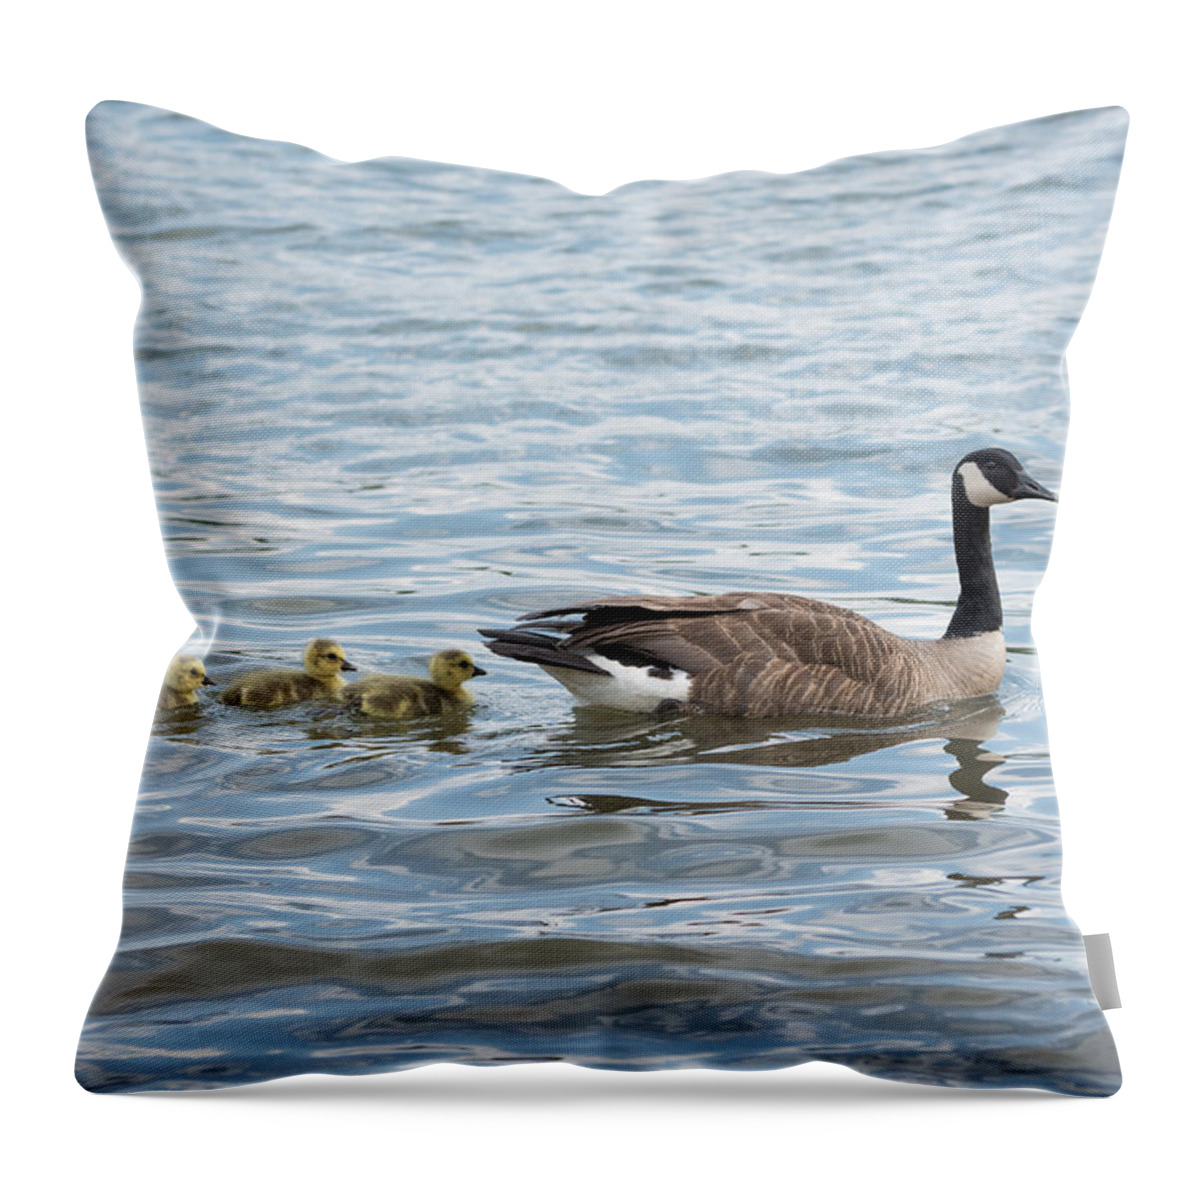 Goose Throw Pillow featuring the photograph Canada Goose With Its Goslings by Holden The Moment